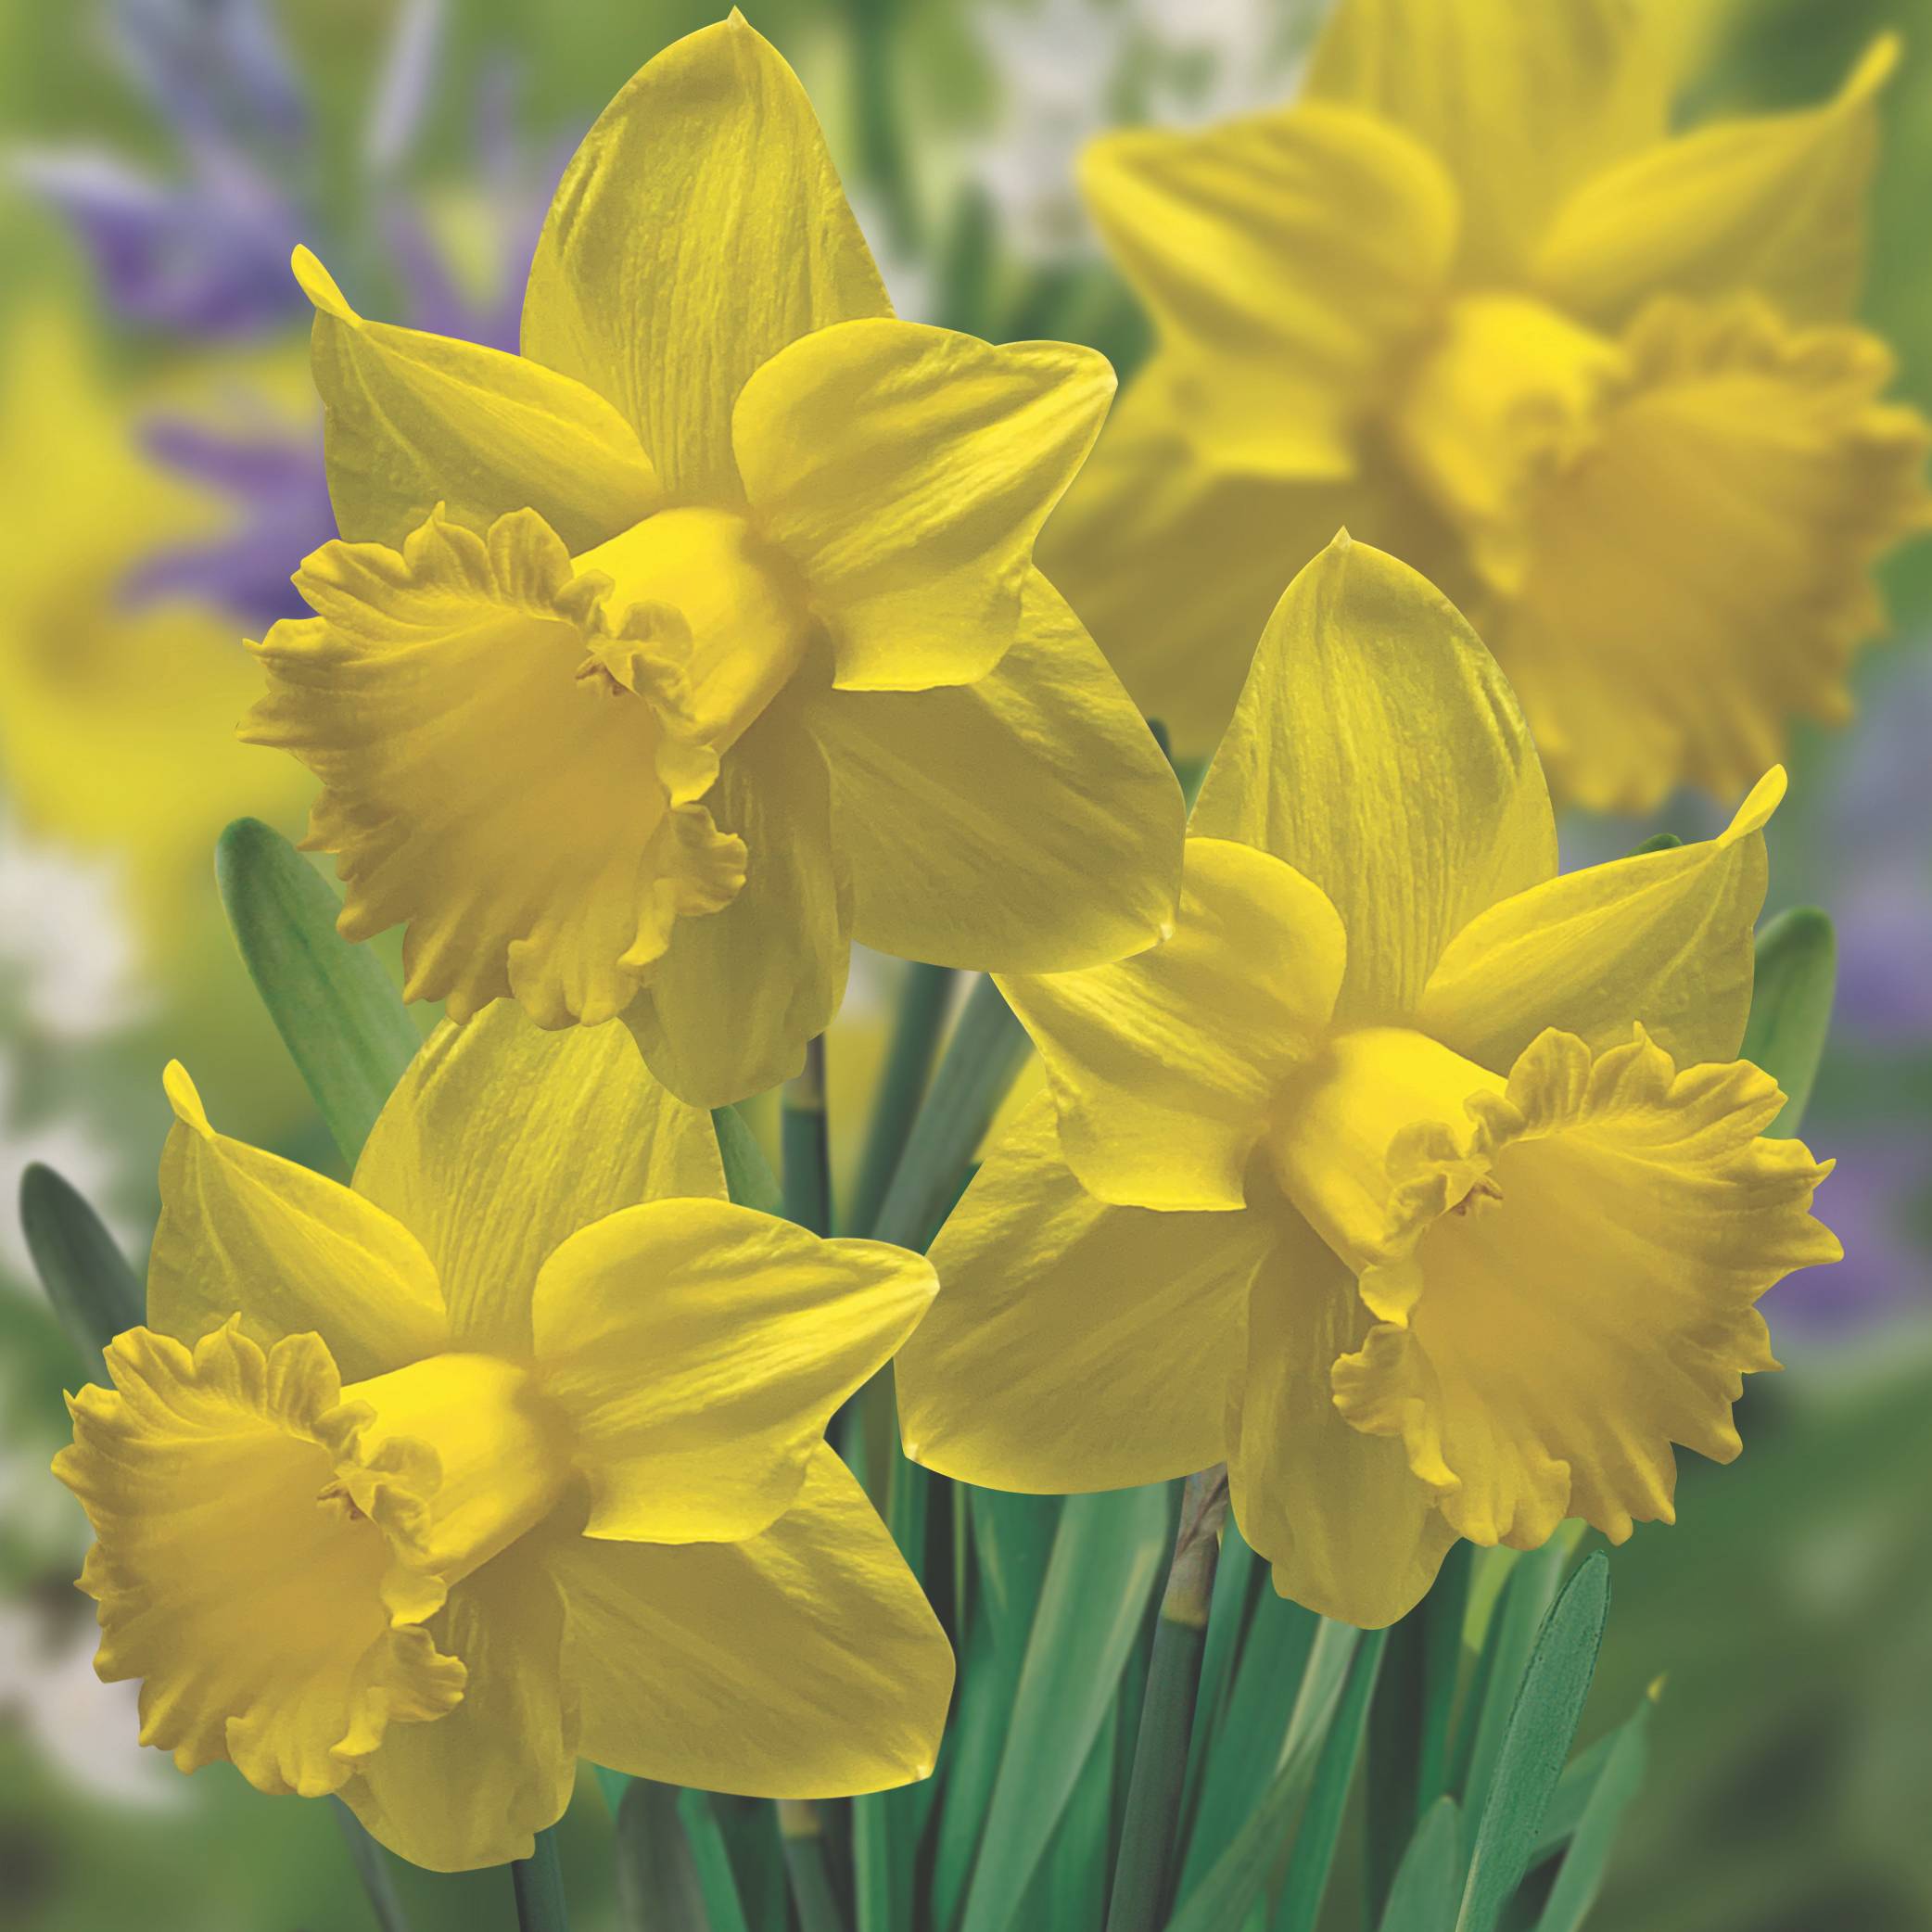 The History of the Daffodil